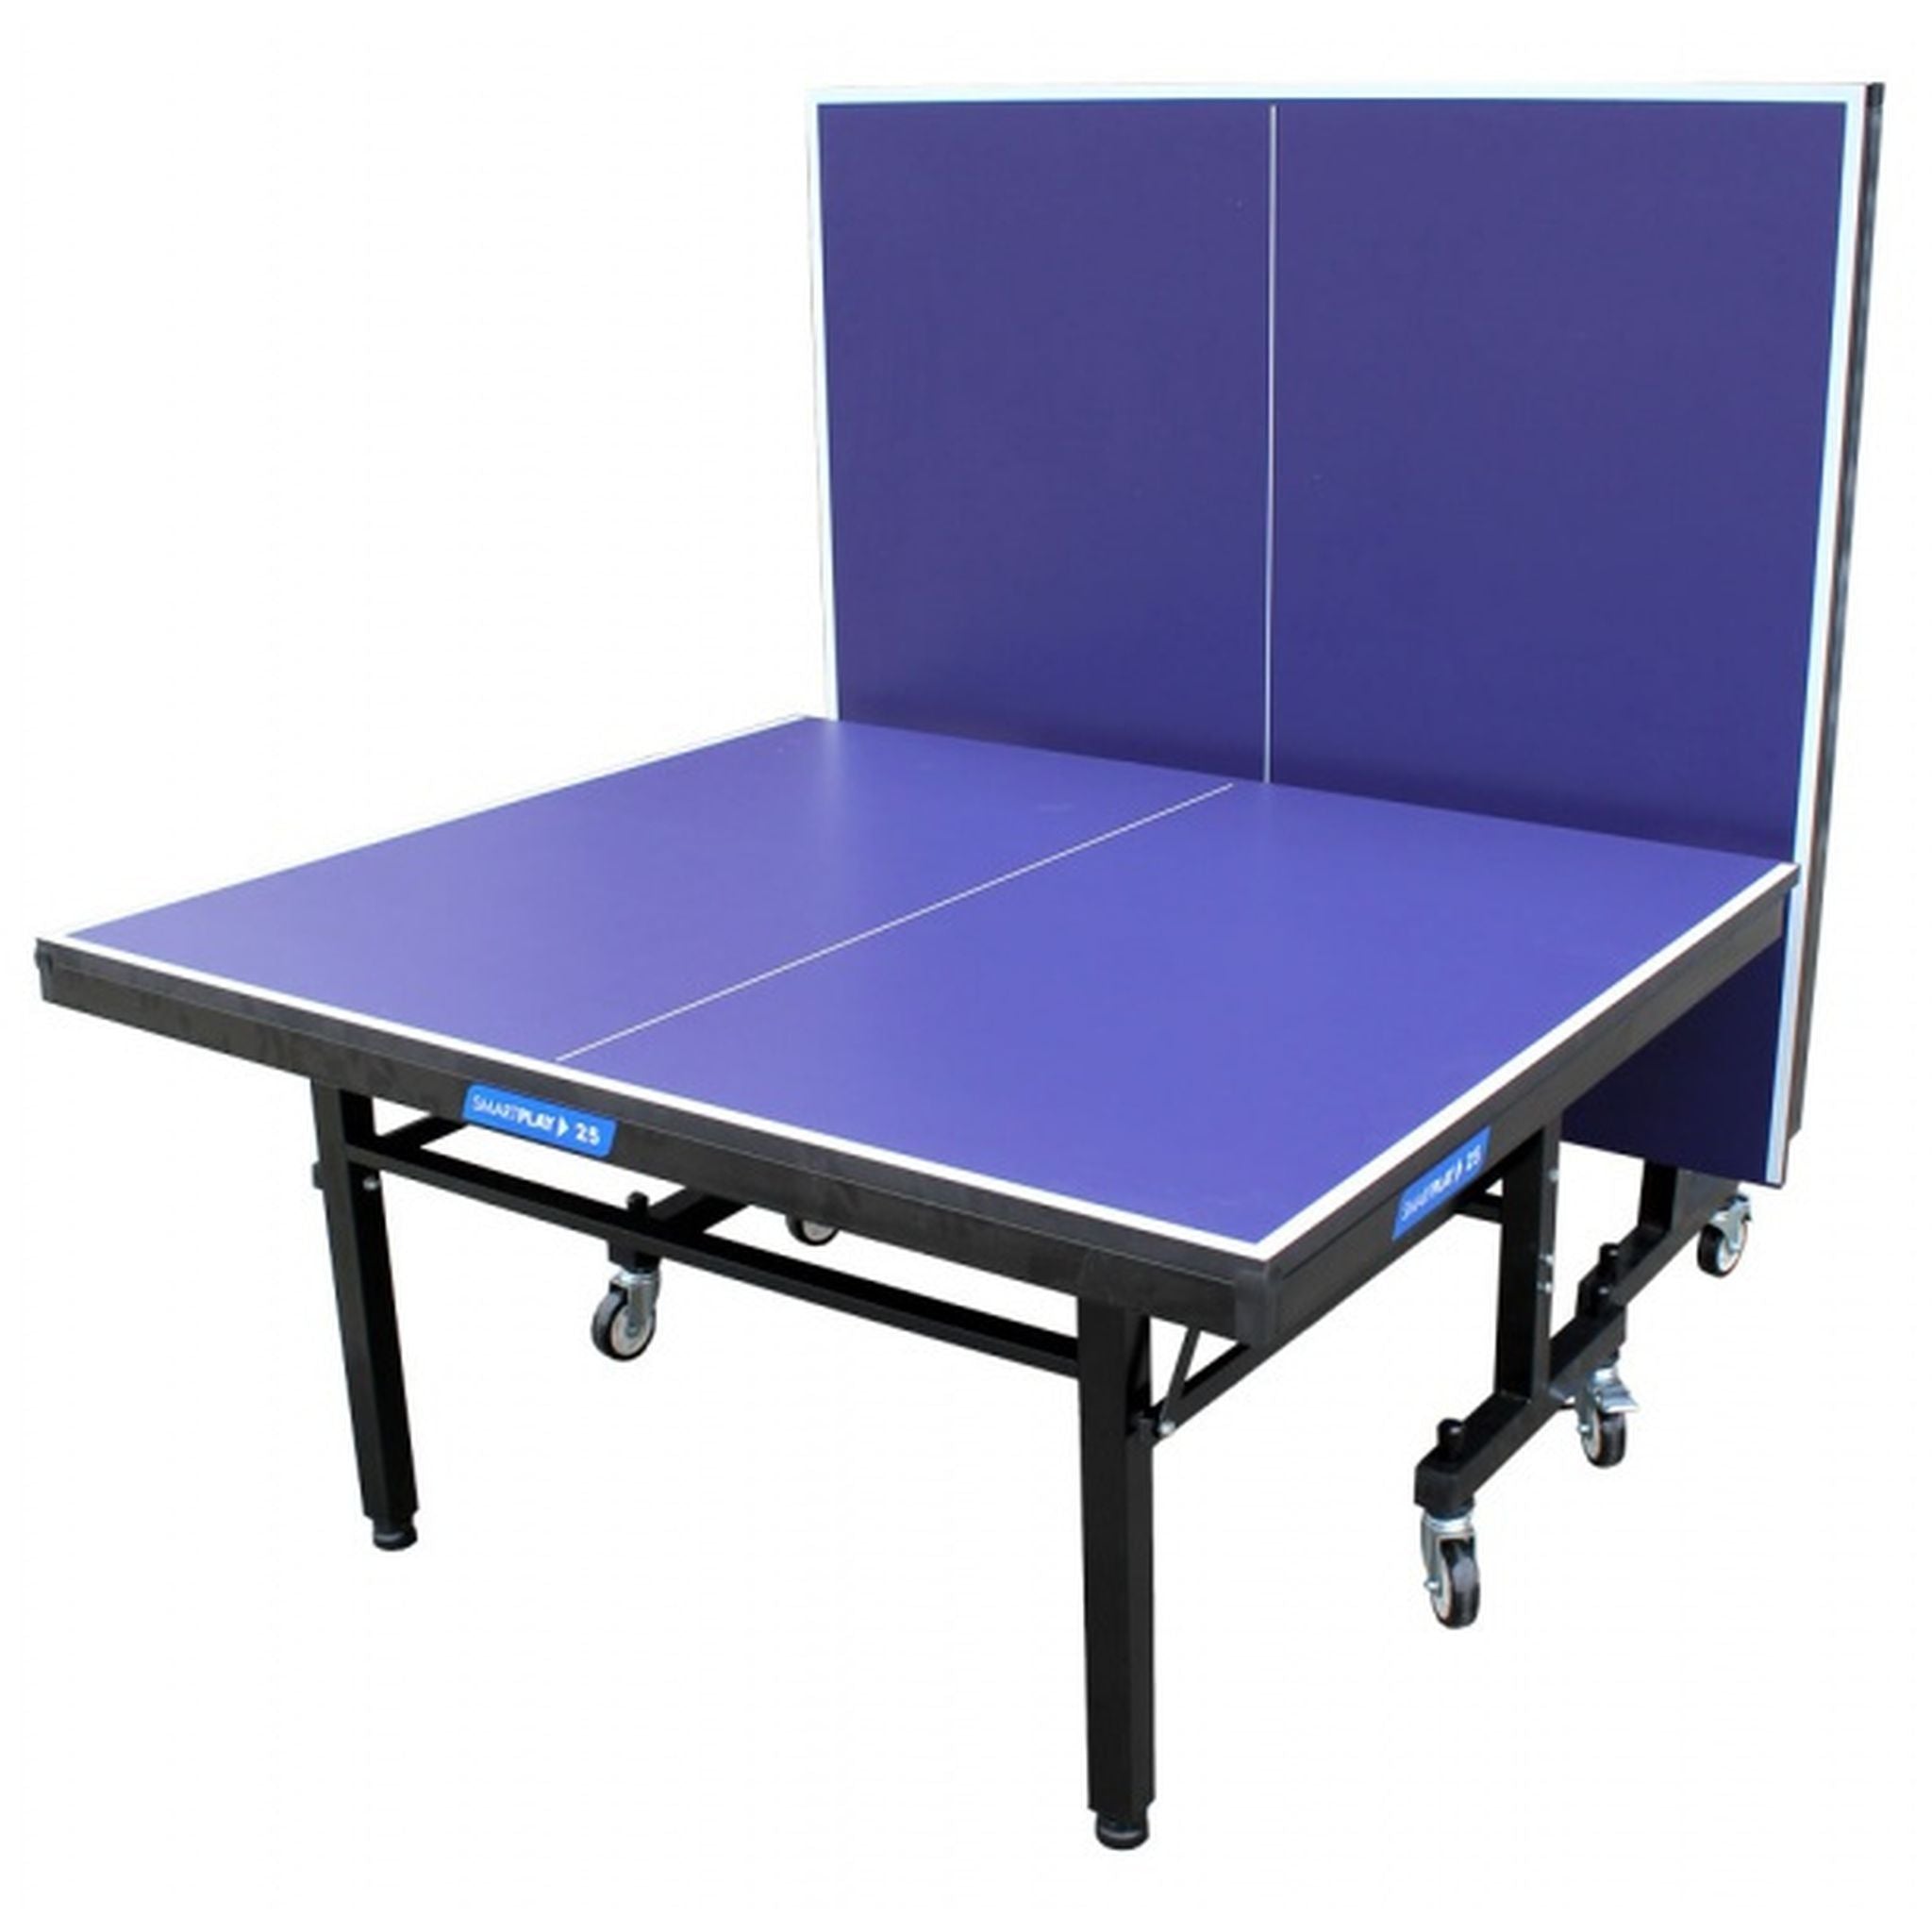 Smartplay 25mm DELUXE Table Tennis Table